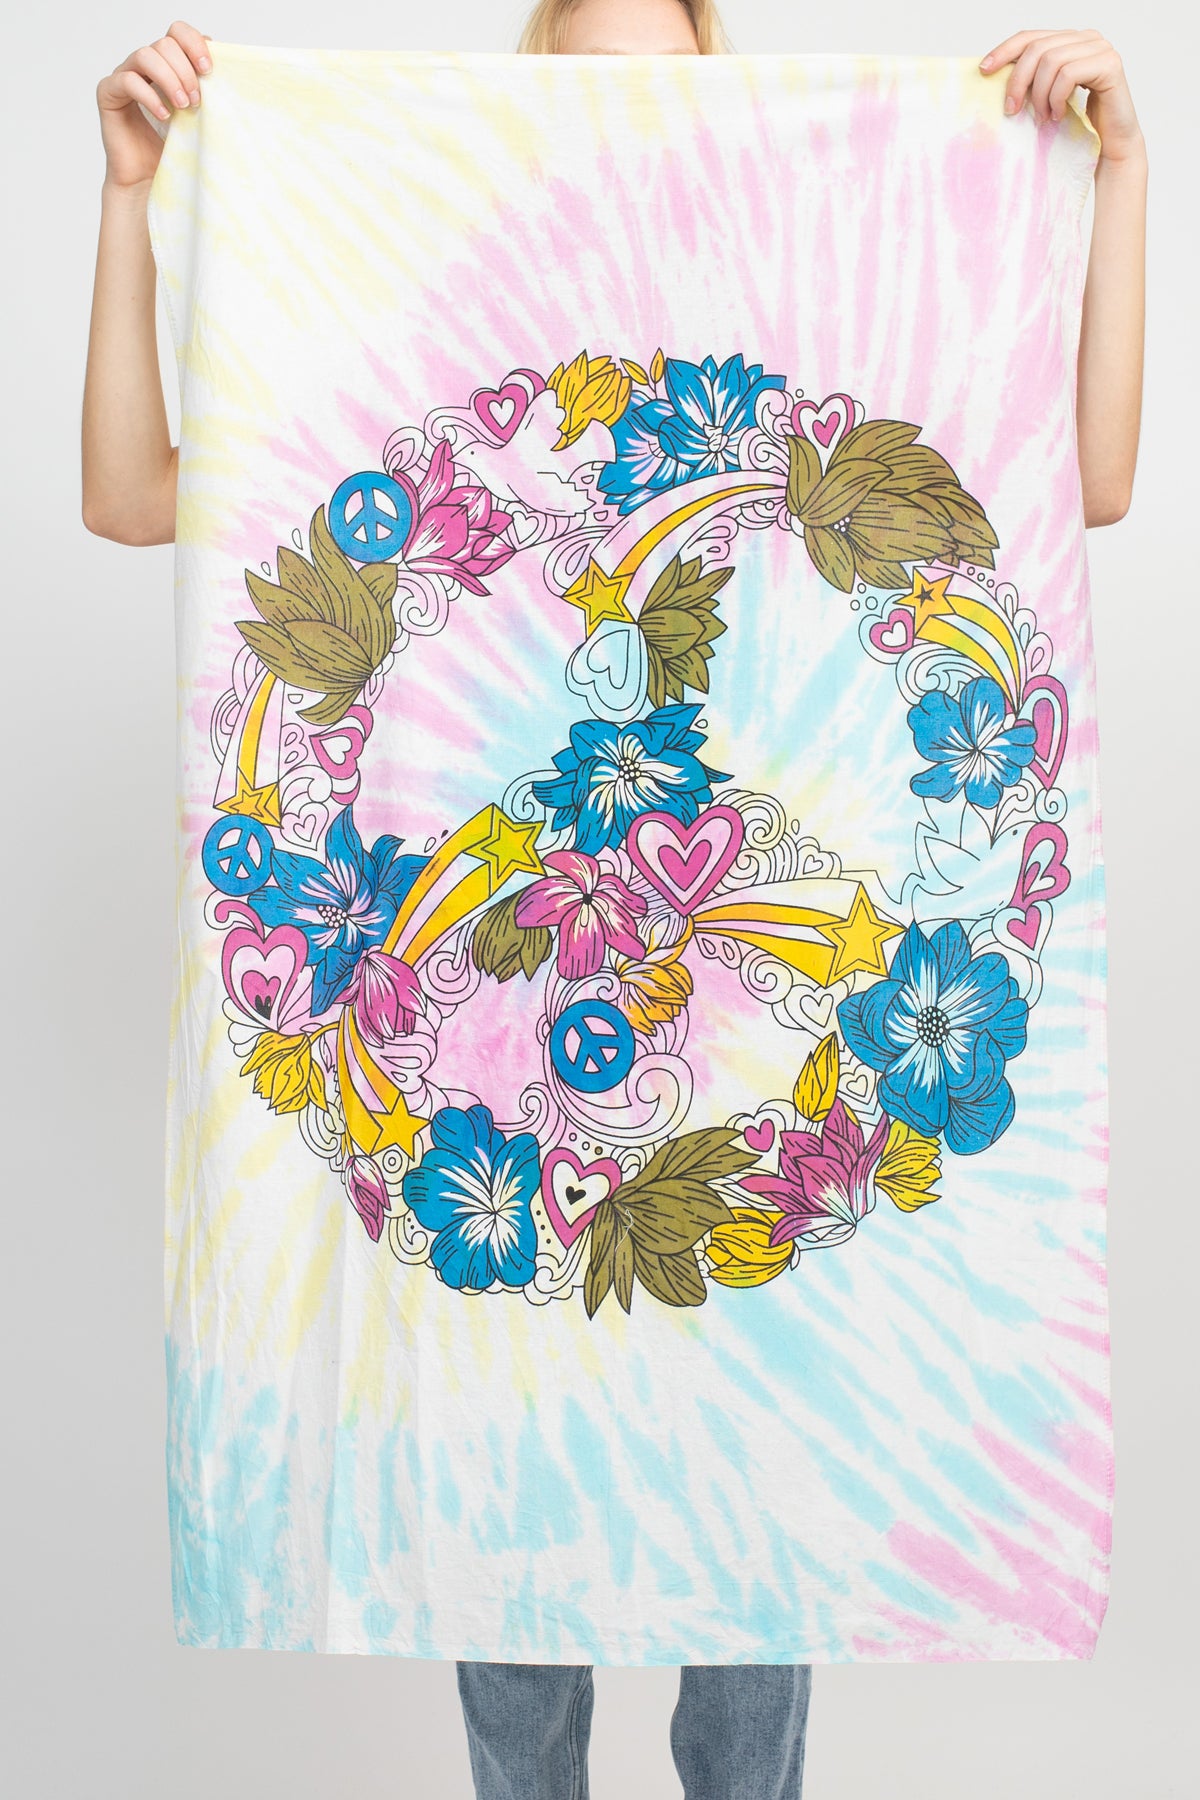 Floral Peace Sign Tie-Dye Small Tapestry